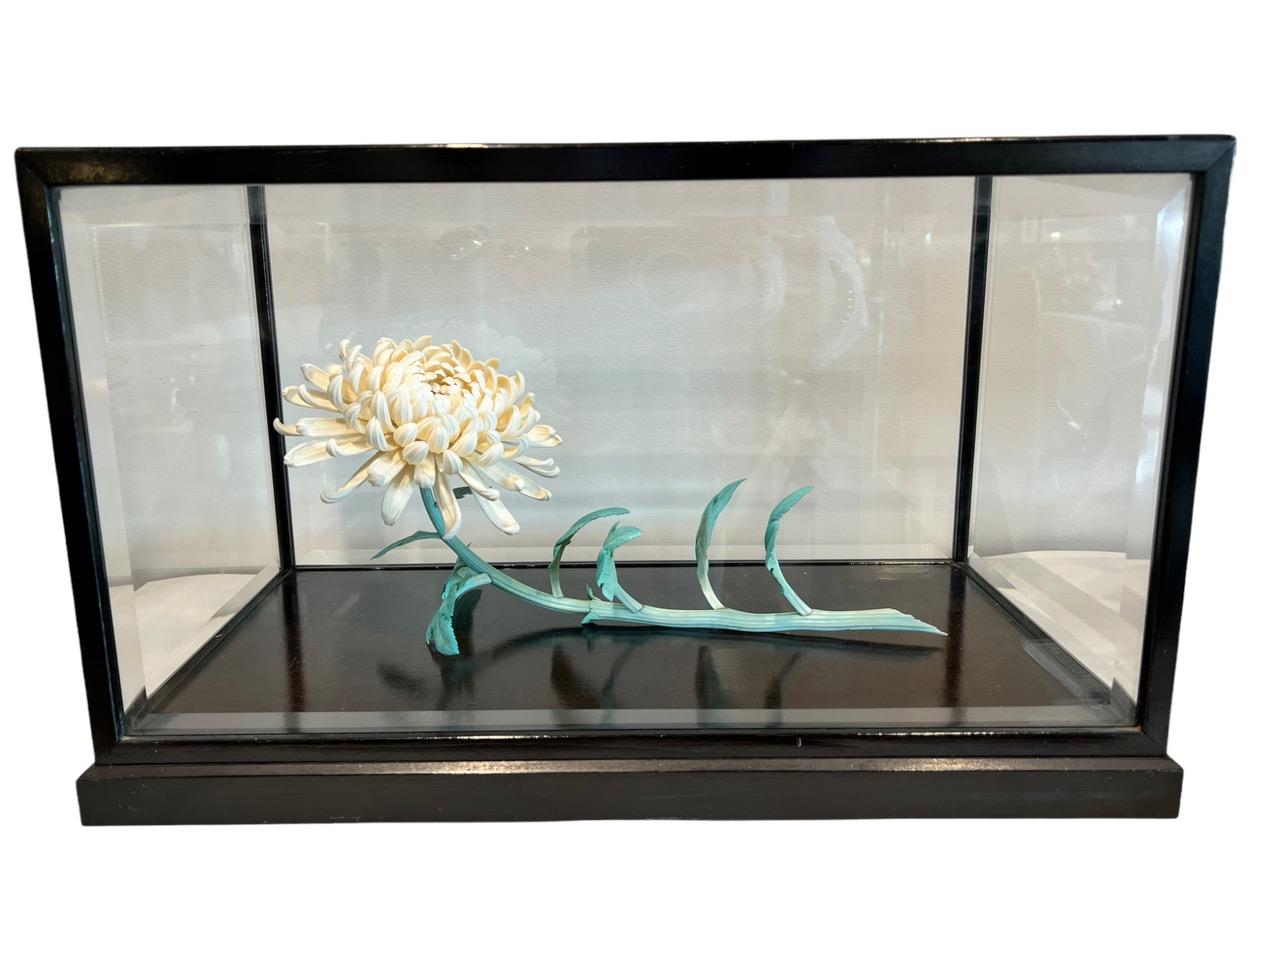 18th Century Japanese hand-carved fully blossomed chrysanthemum flower figurine made of white bone with branch and leaves painted. The flower is placed inside its original glass and wood case. These flowers are native to East Asia and northeastern